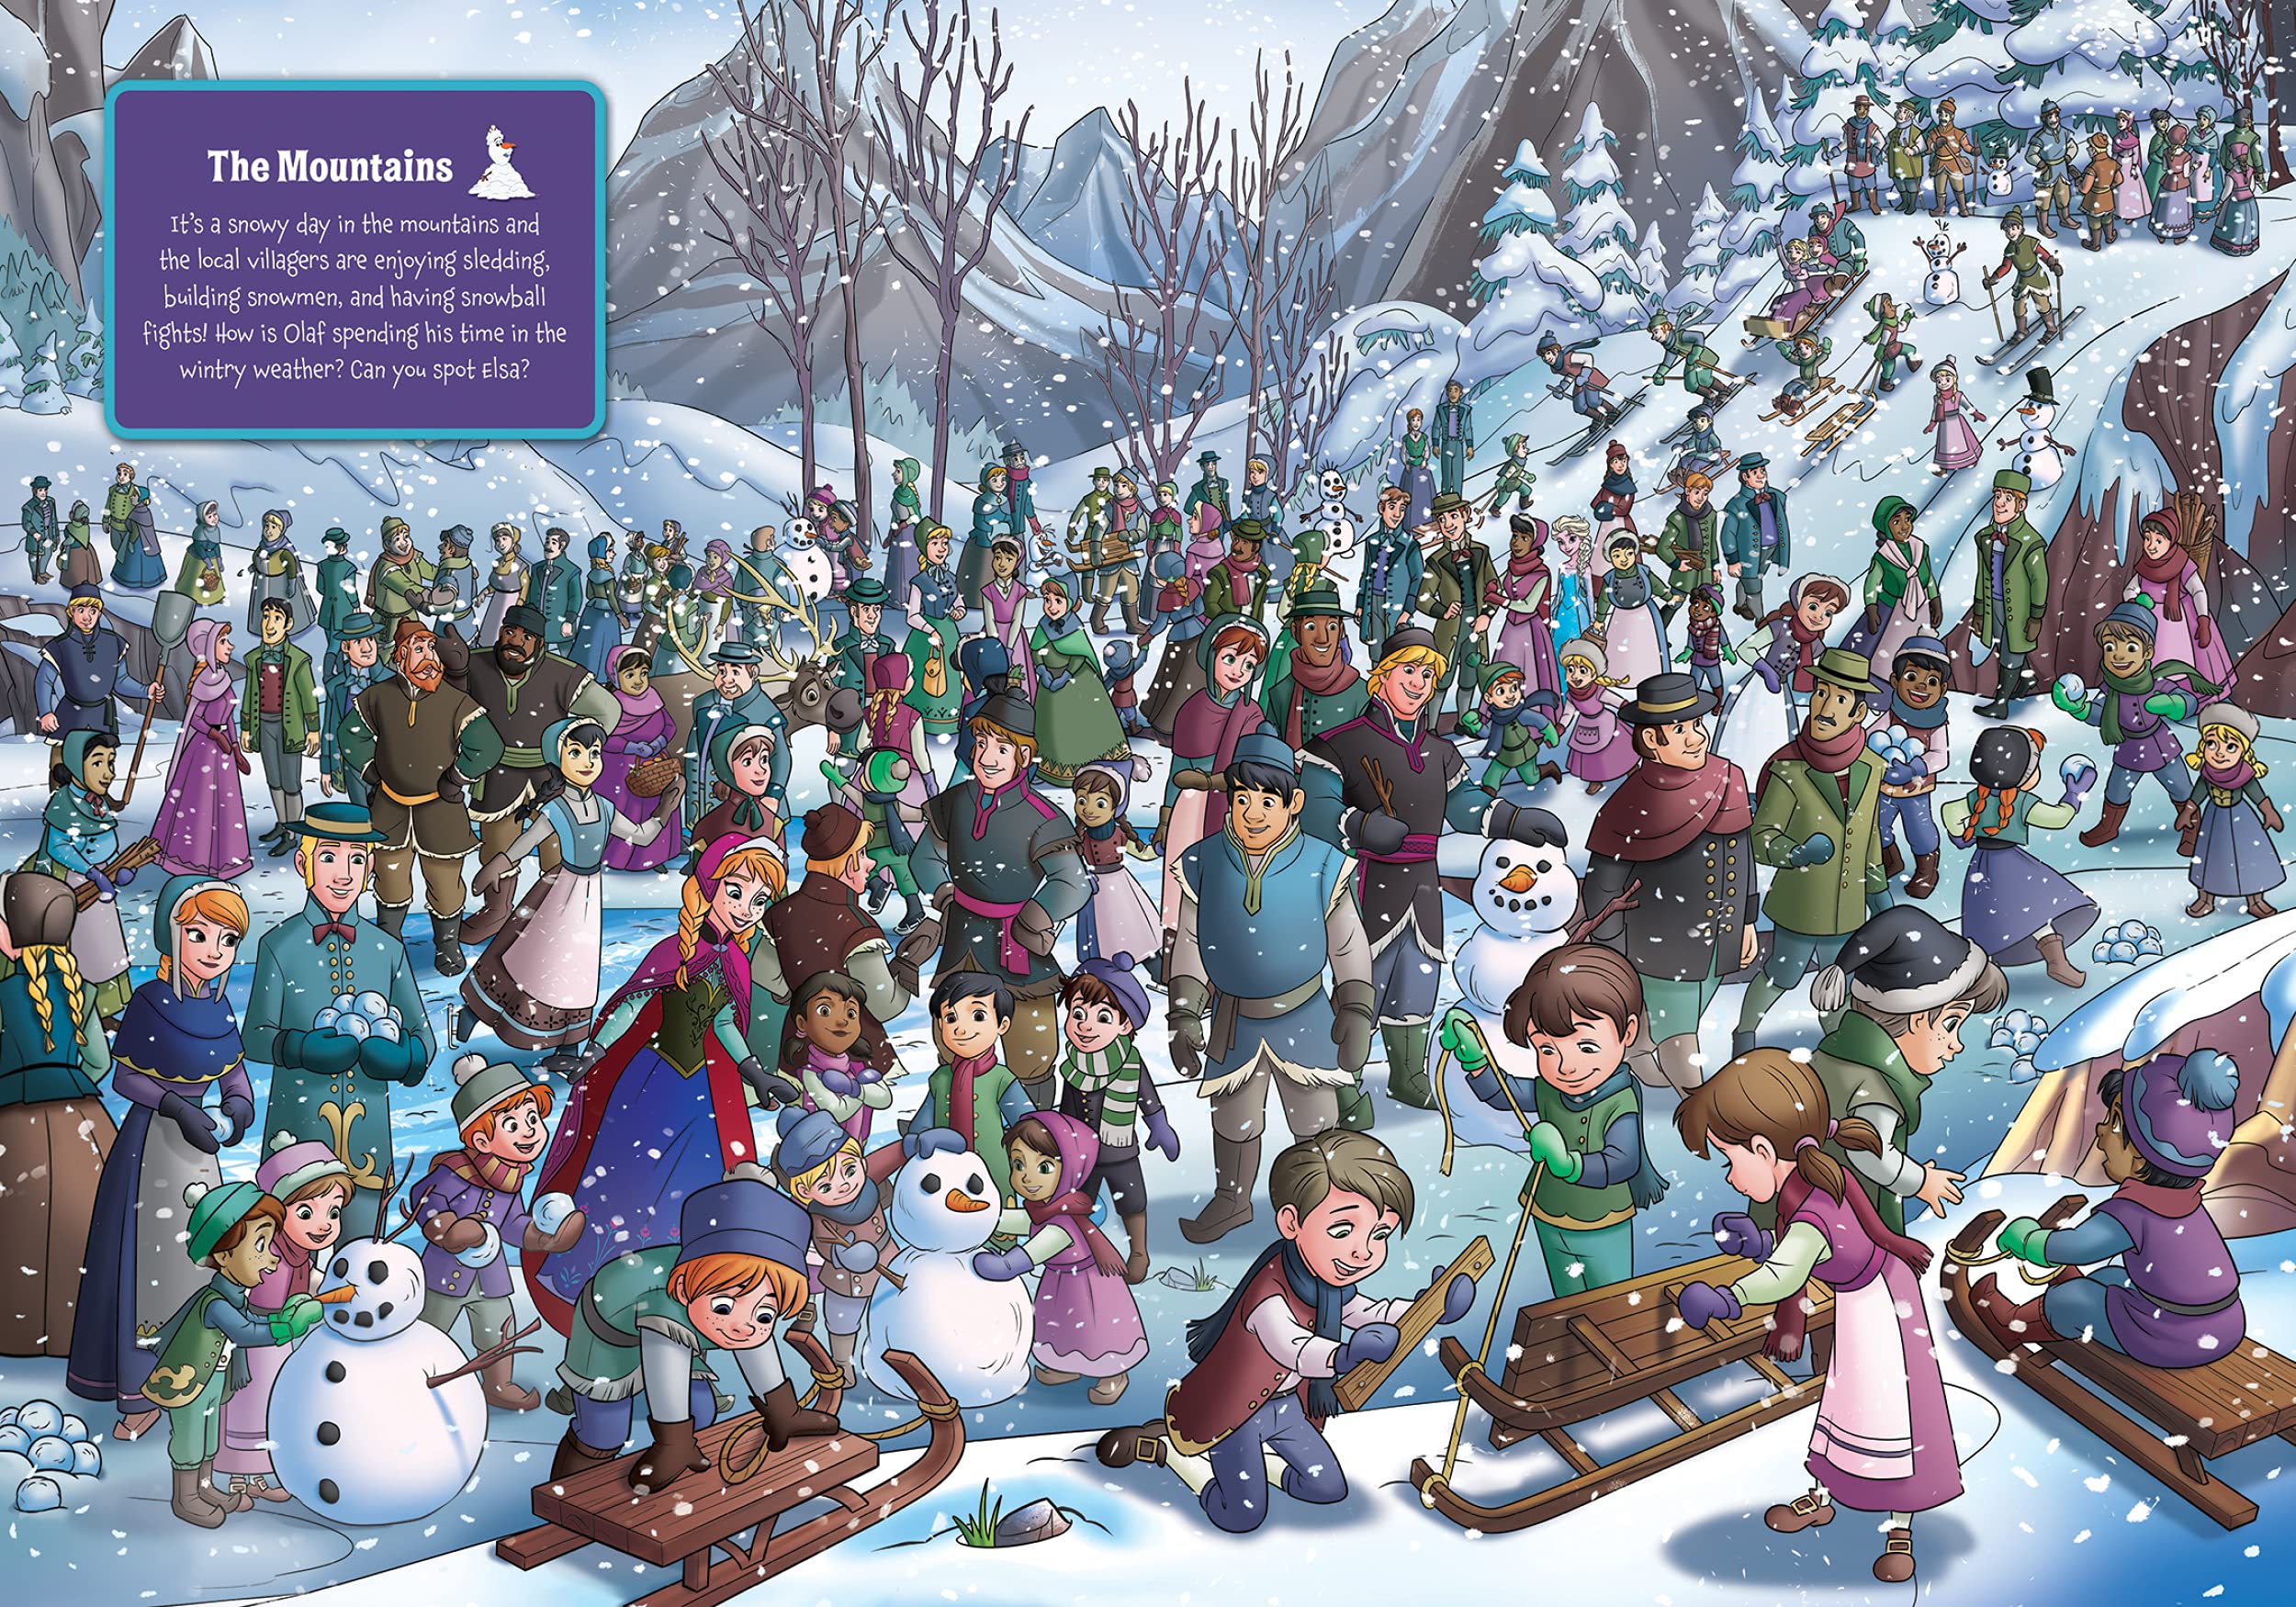 Disney Frozen - Where’s Olaf? Look and Find Activity Book - Includes Elsa, Anna, and More Frozen Favorites - PI Kids